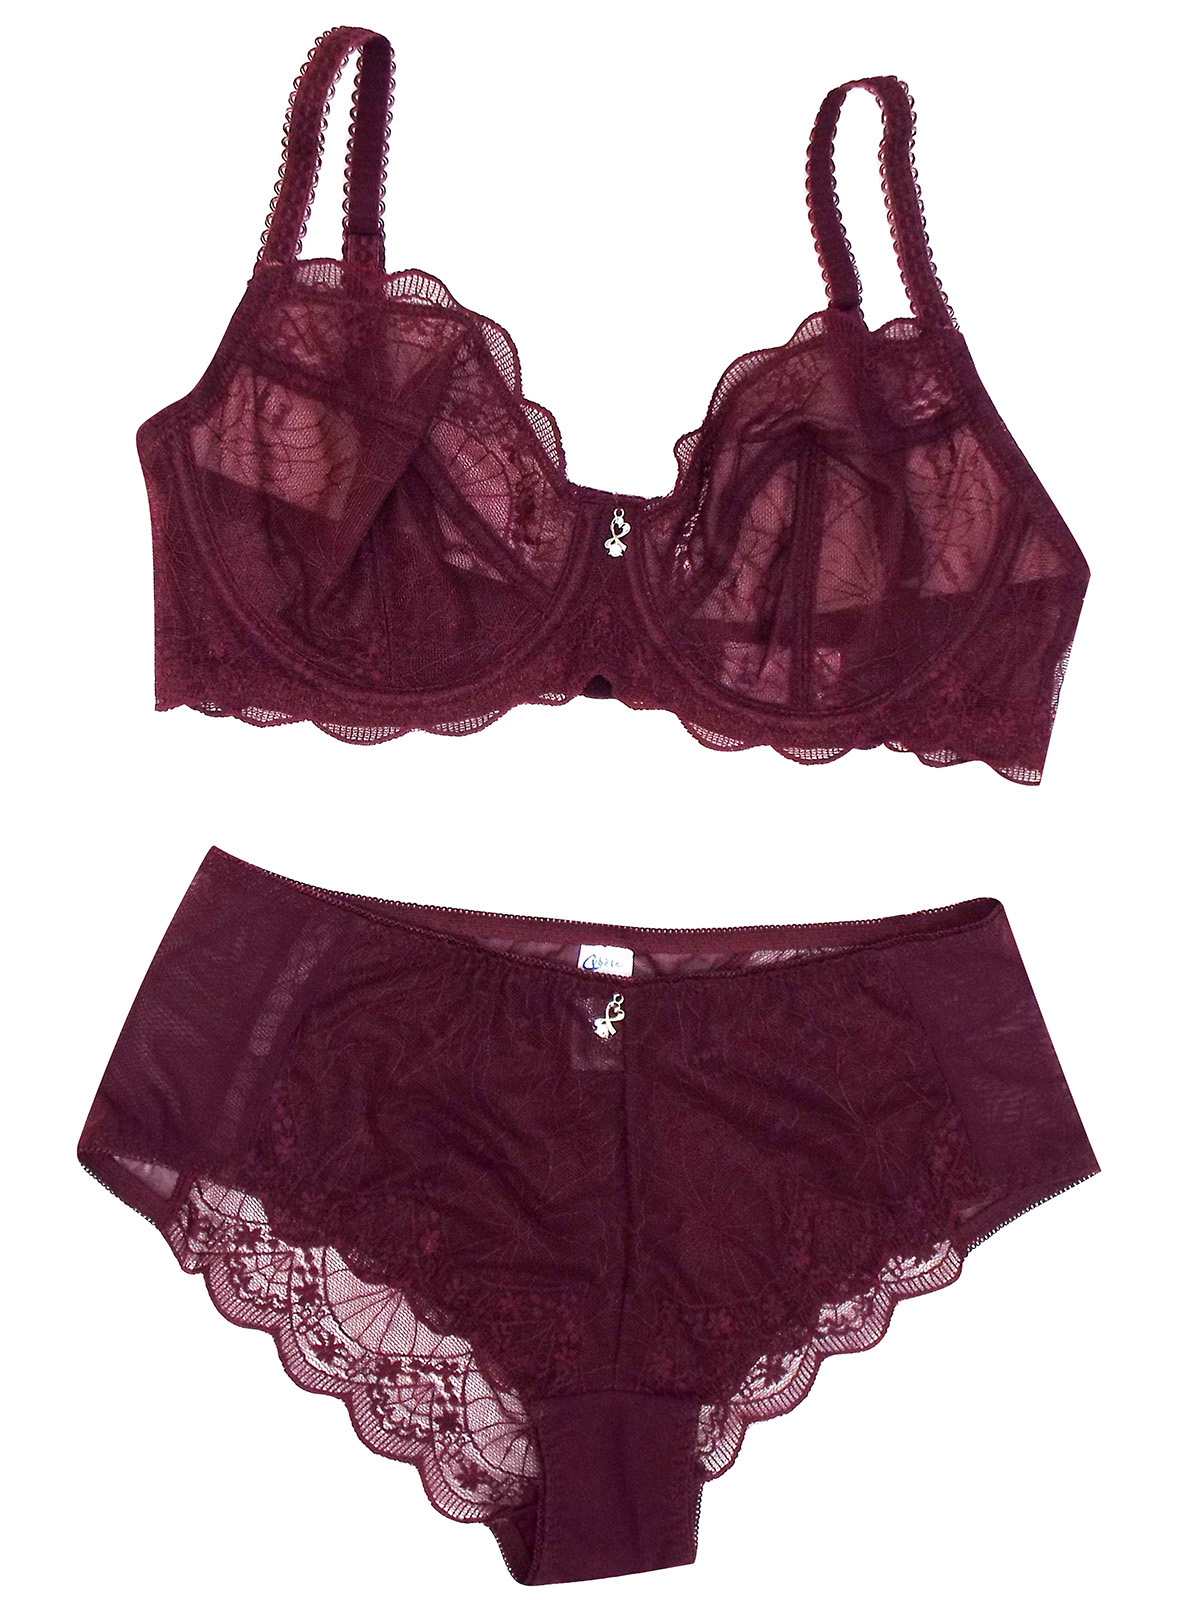 Assorted Bra And Knicker Lingerie Sets Size 34b10 6295